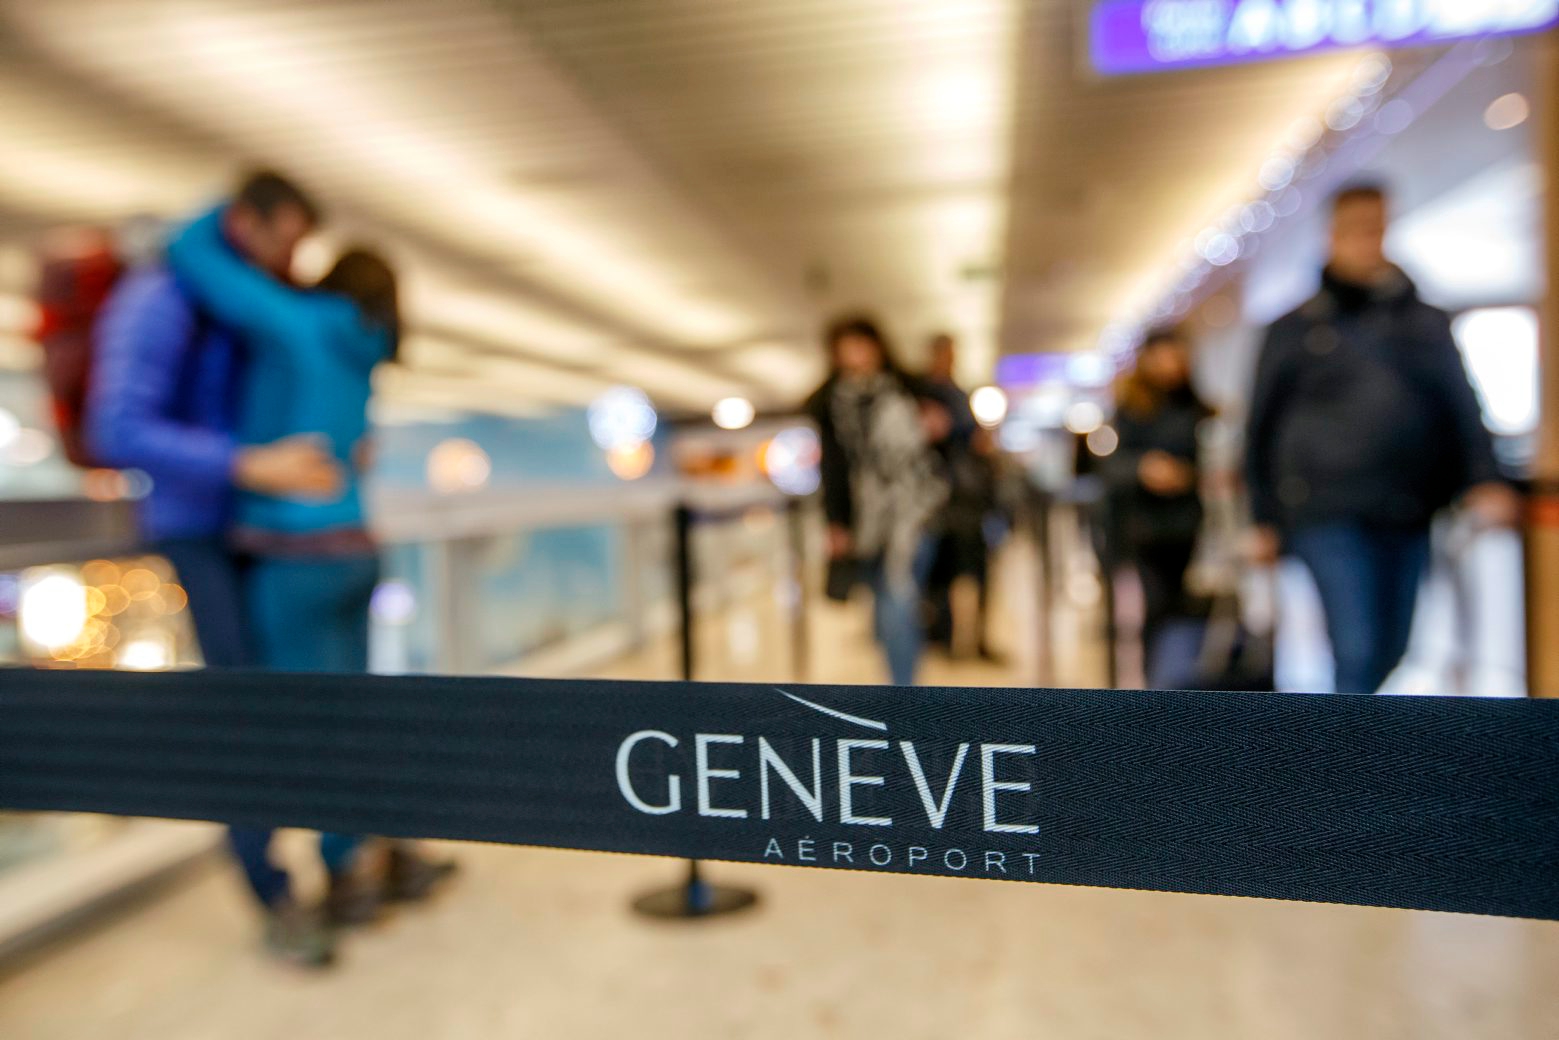 ARCHIV - ZU DEN JAHRESZAHLEN 2018 DES GENEVE AEROPORT STELLEN WIR IHNEN FOLGENDES BILDMATERIAL ZUR VERFUEGUNG, AM MITTWOCH, 27. MAERZ 2019 - Flight passengers arrive for security check for taking their aircrafts at the Geneva Airport, in Geneva, Switzerland, Sunday, January 8, 2017. Thousands of skiers and travelers are expected at the airport after celebrating Christmas and New Year for returning in their countries. (KEYSTONE/Salvatore Di Nolfi) SCHWEIZ FLUGHAFEN GENF BMK 2018